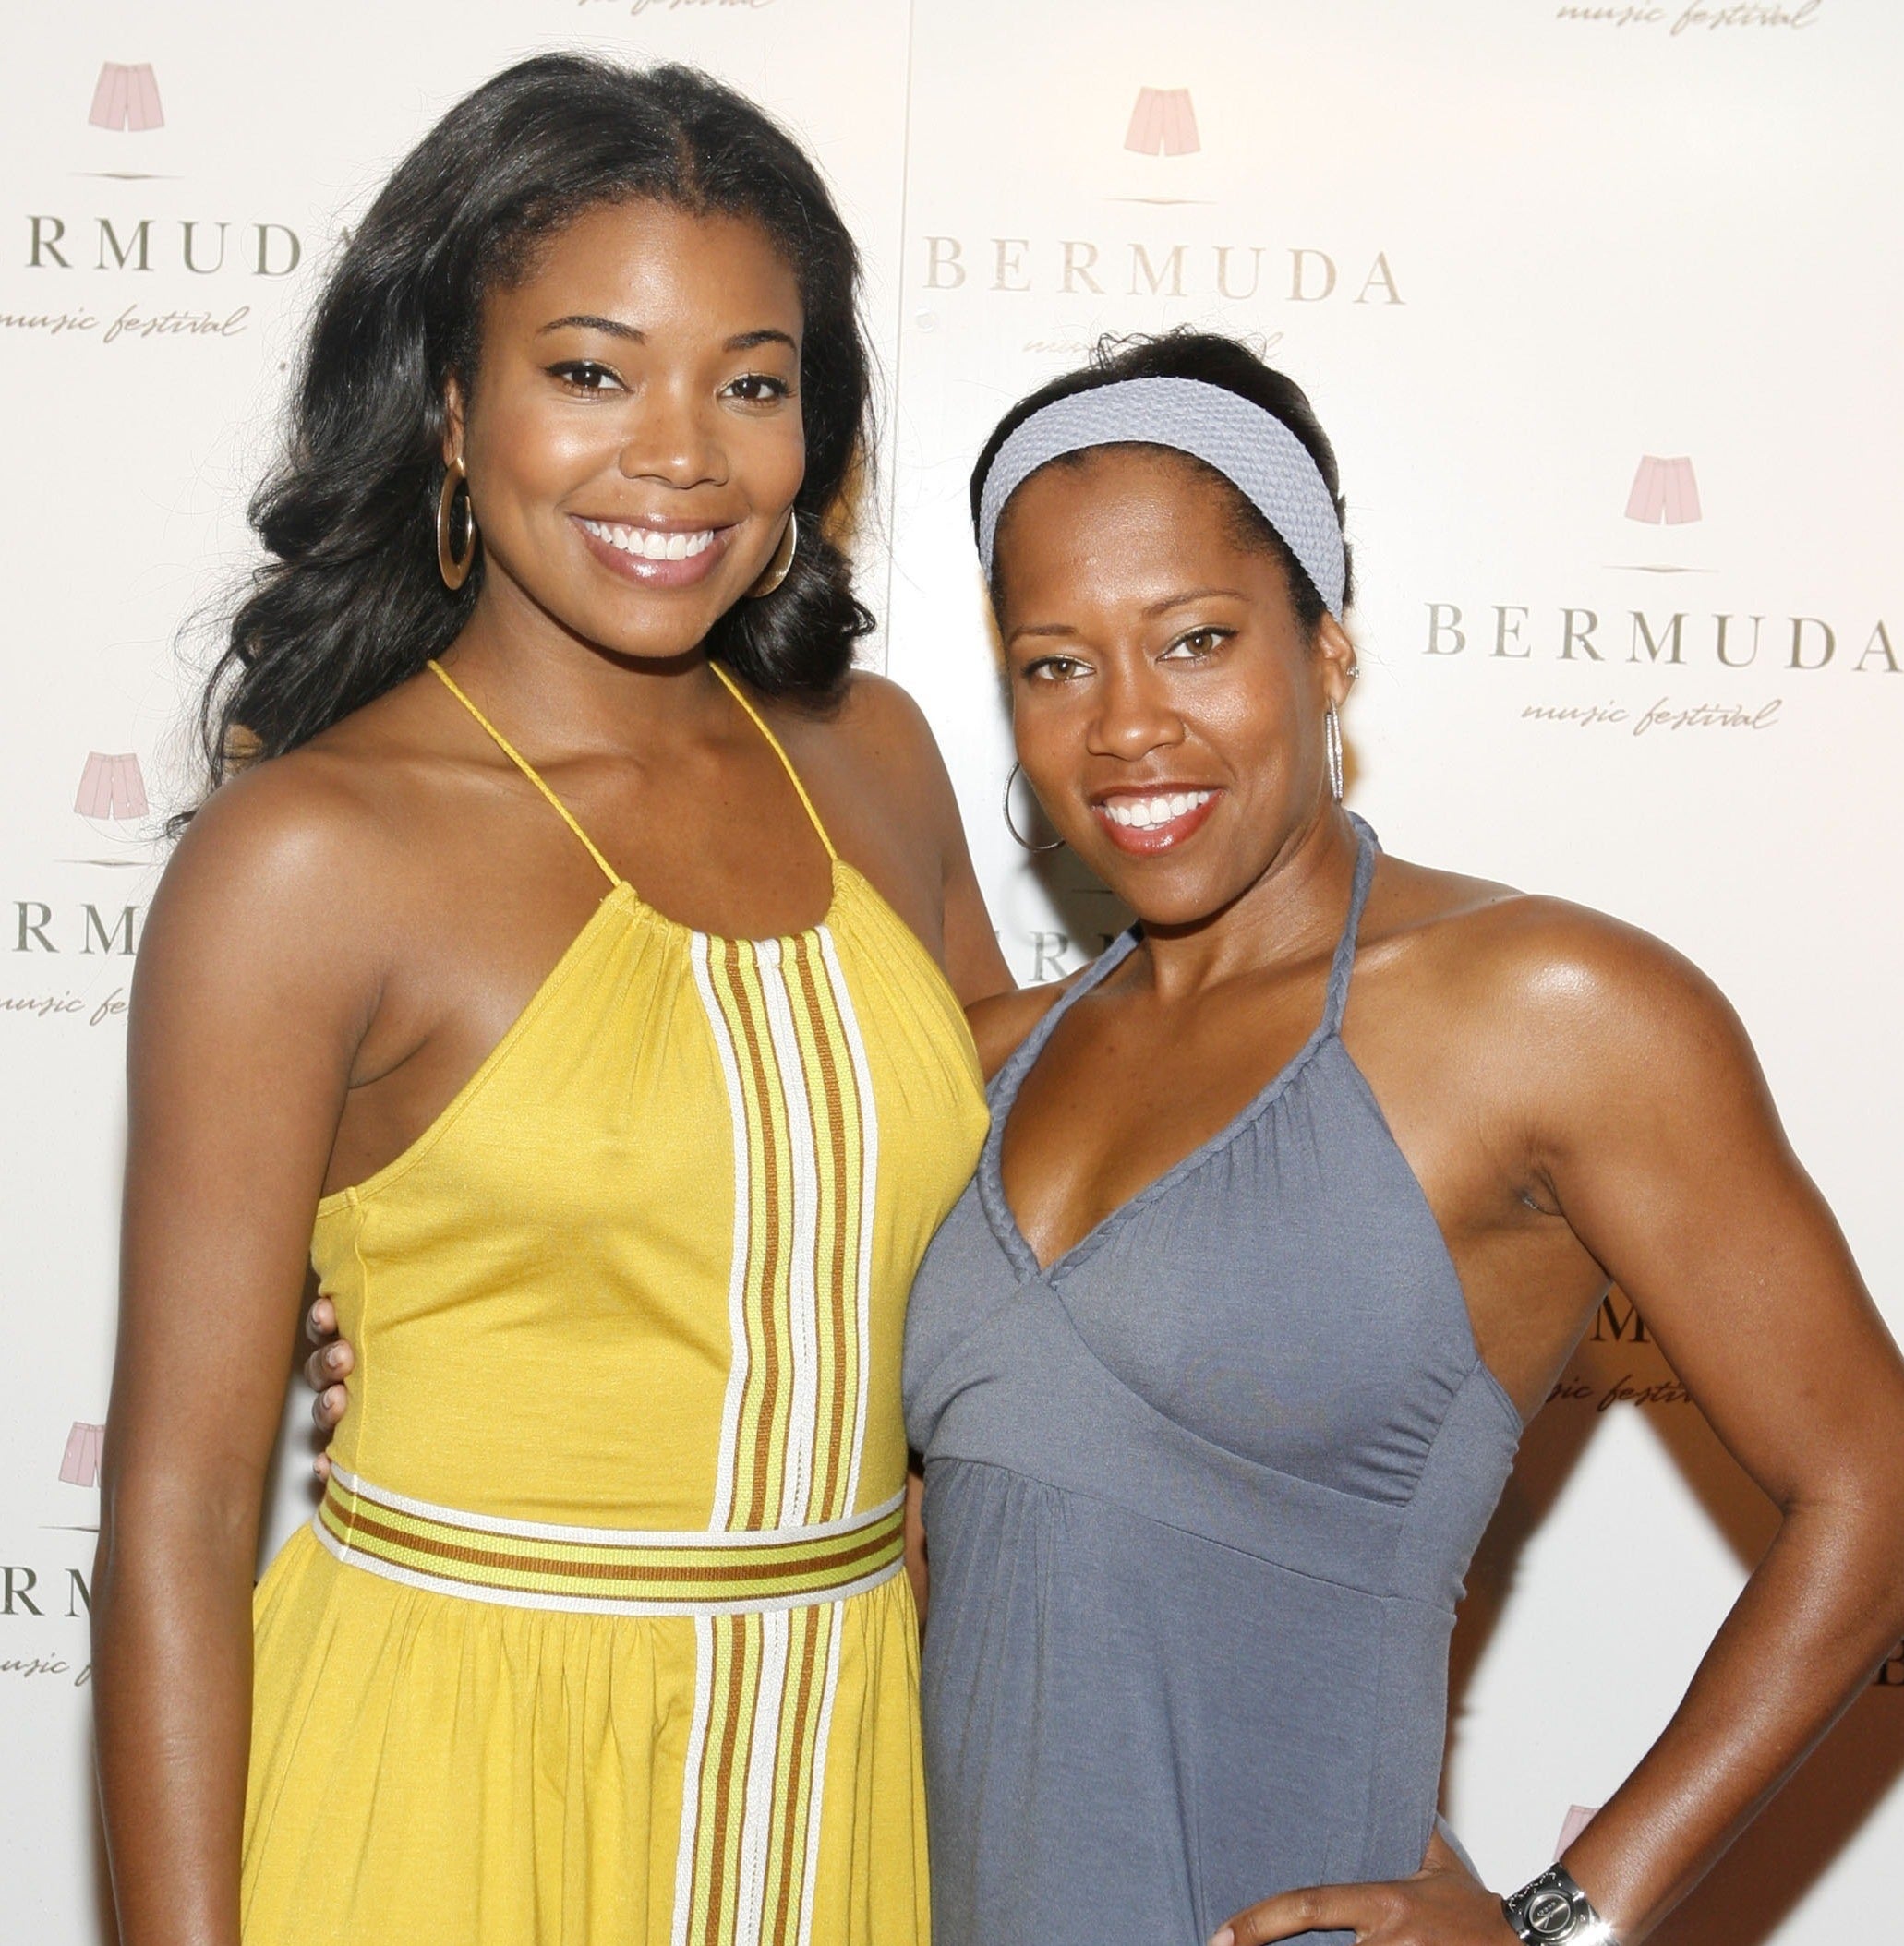 Photo of Gabrielle Union and Regina King at an event